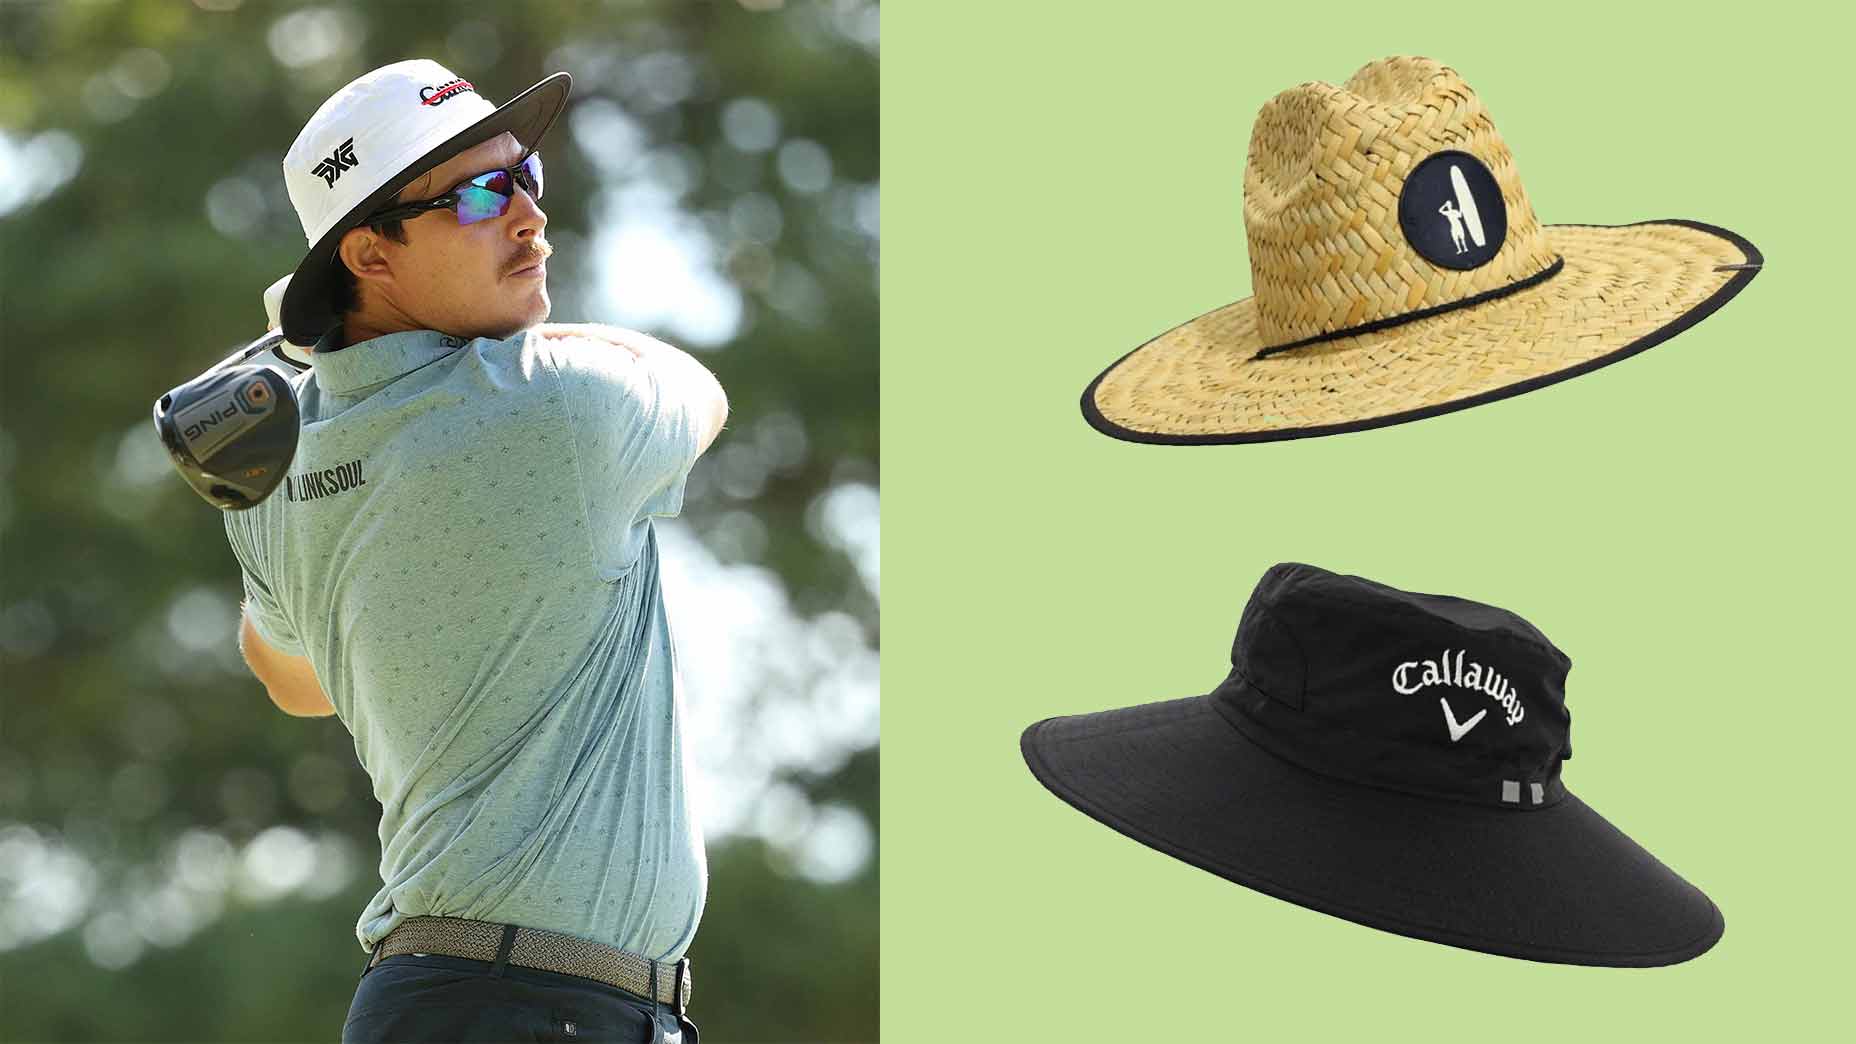 These 5 wide-brim hats offer full coverage from the sun's harsh UV rays